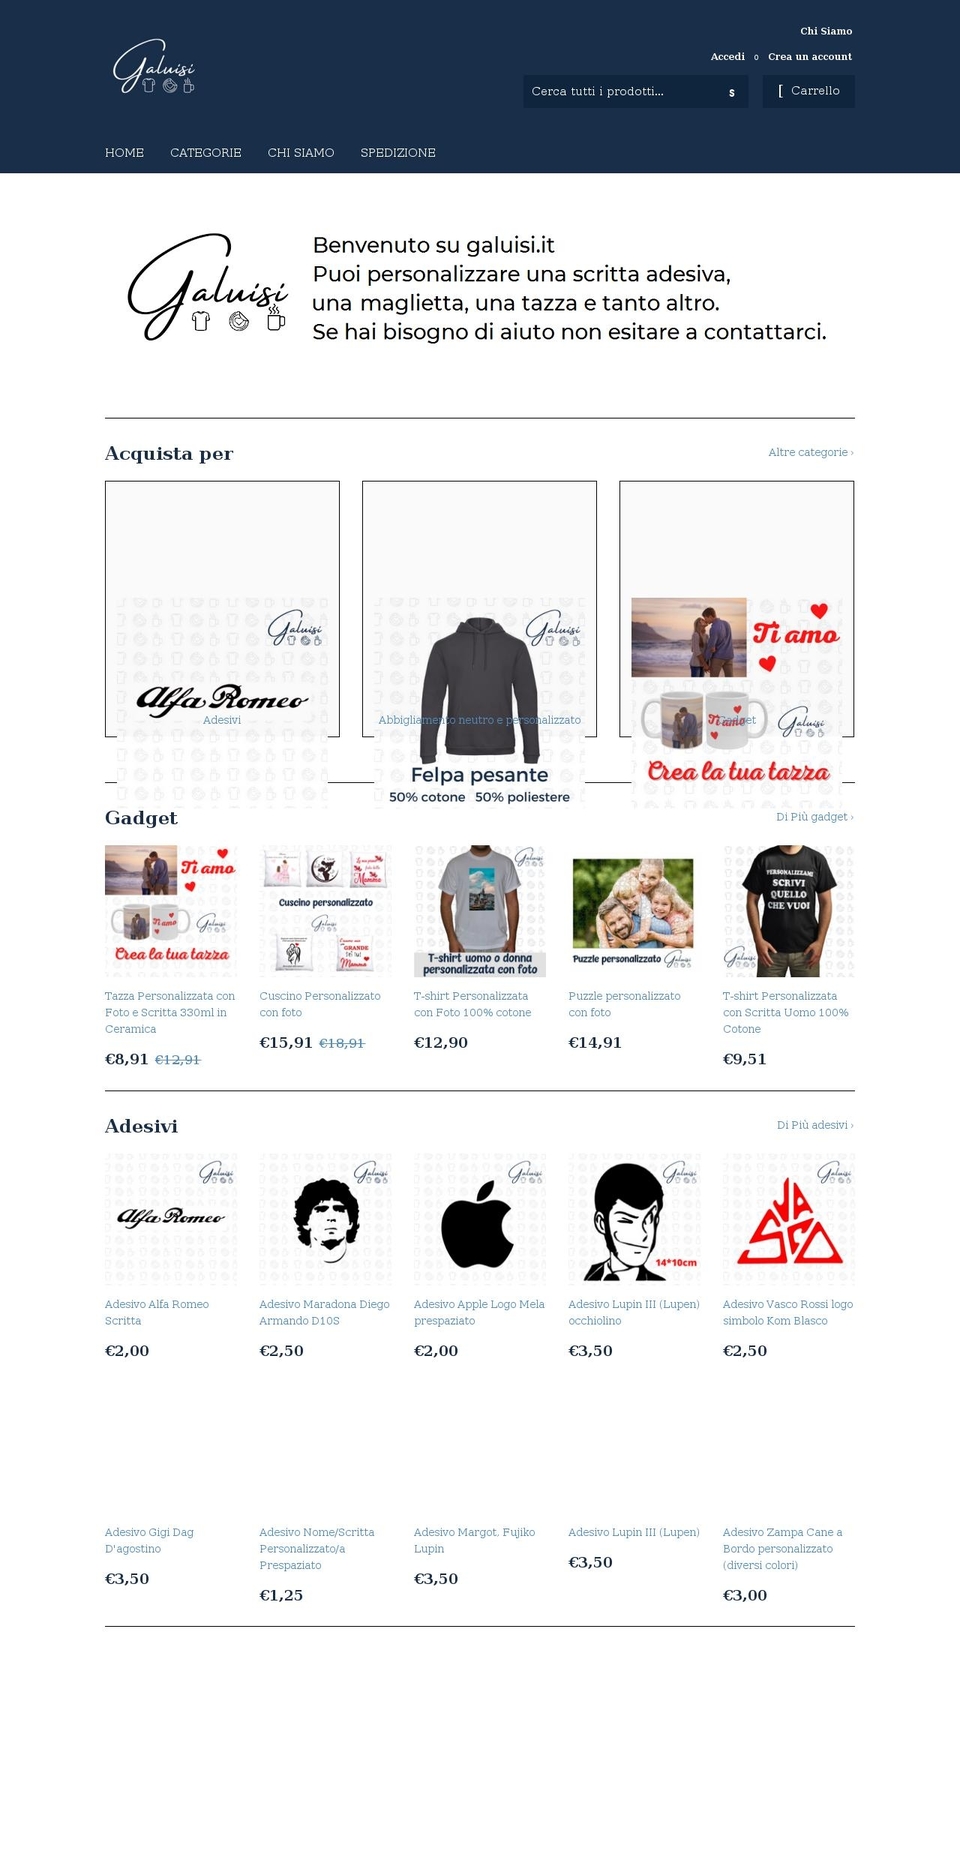 nego Shopify theme site example galuisi.it